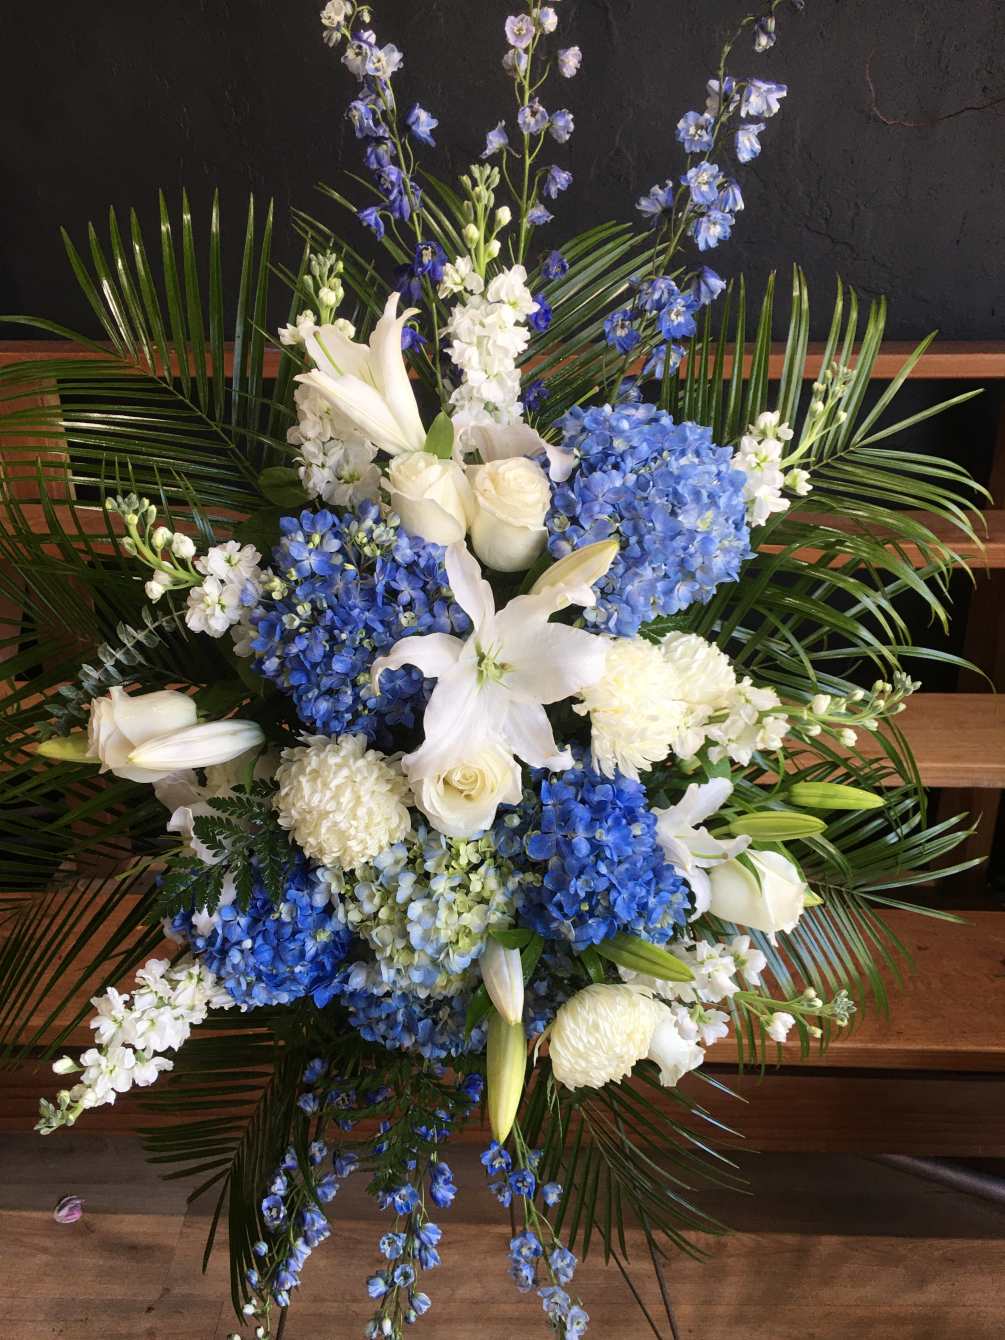 A standing spray of hydrangea, roses, lilies, dianthus, mums and ferns,

SUBSITUTION POLICY
In